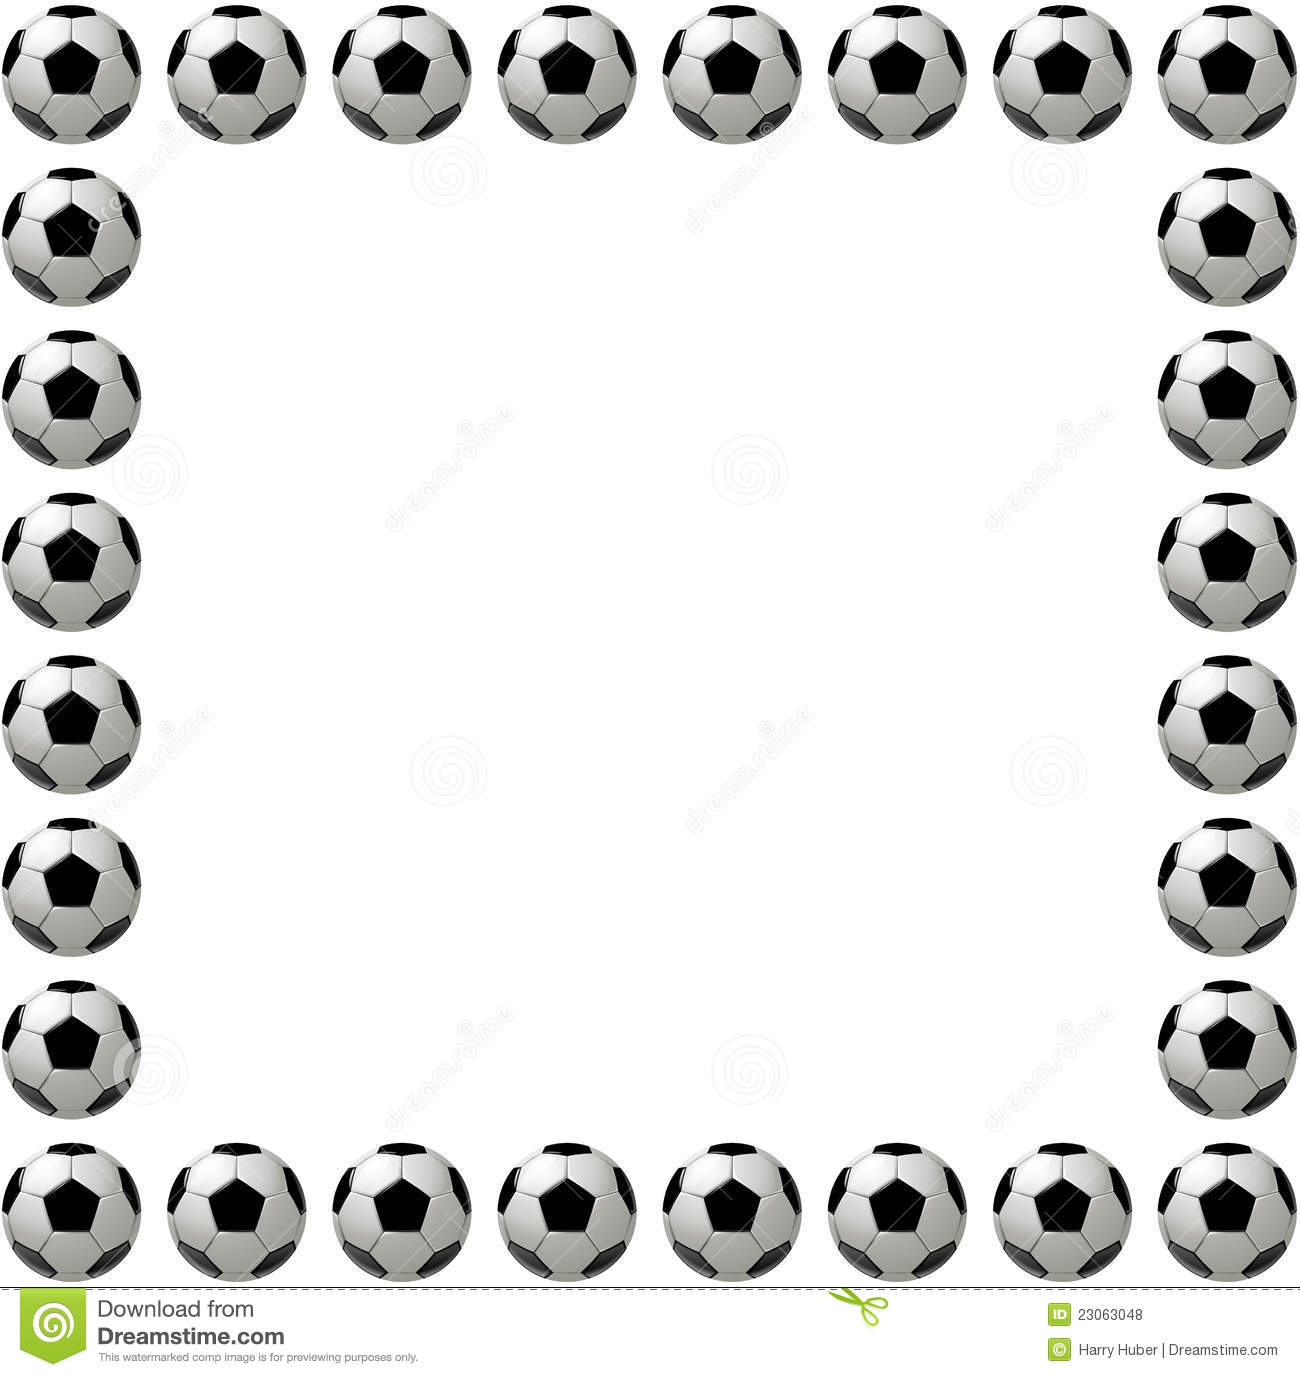 Square Soccer Ball Or Football Frame Royalty Free Stock Photos   Image    